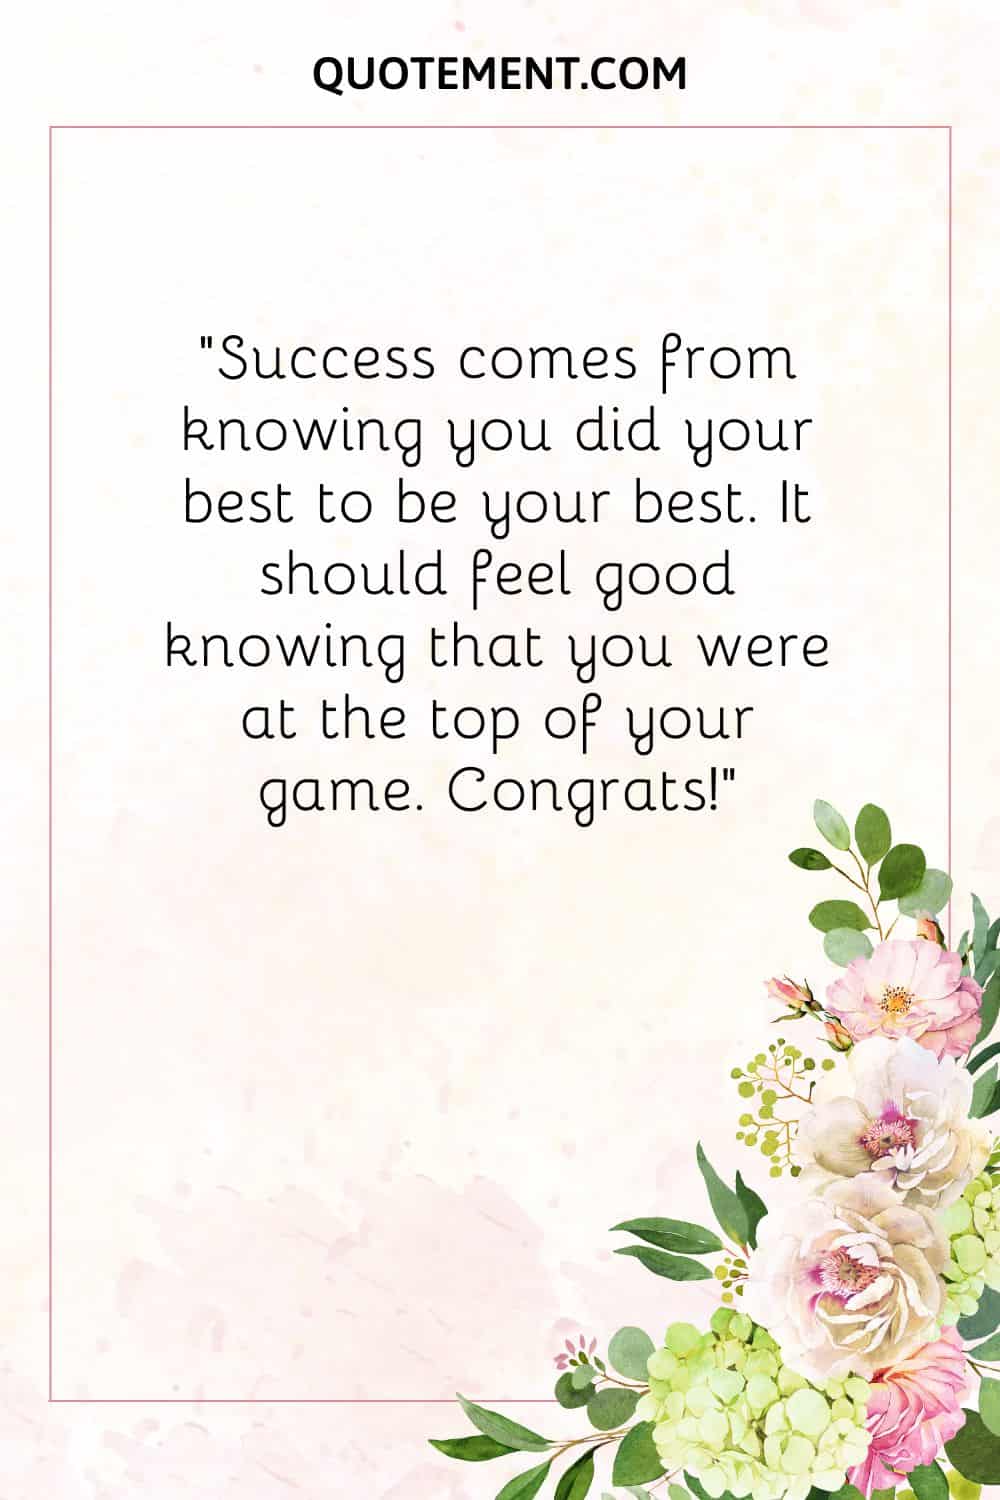 Success comes from knowing you did your best to be your best